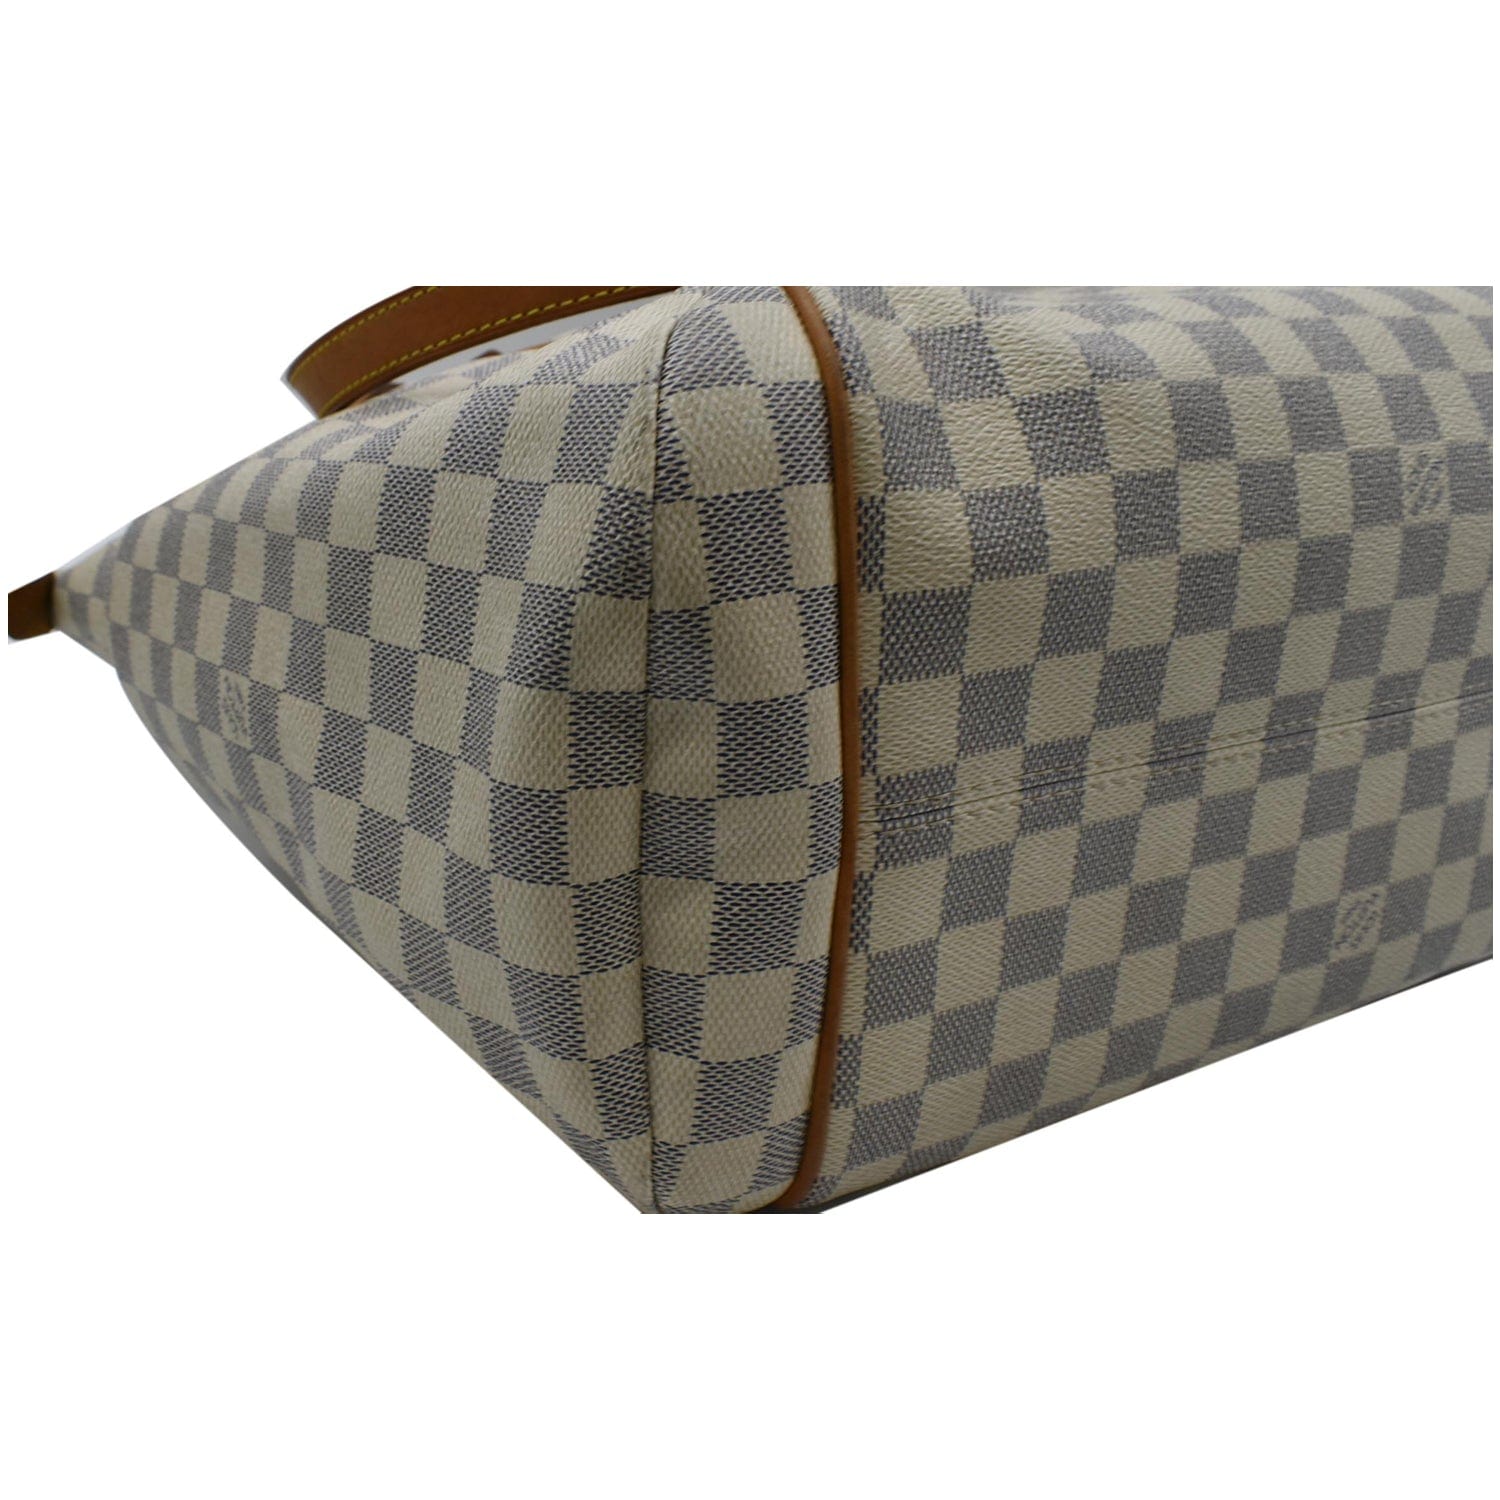 LOUIS VUITTON Totally GM White Checkered Coated Canvas Shoulder